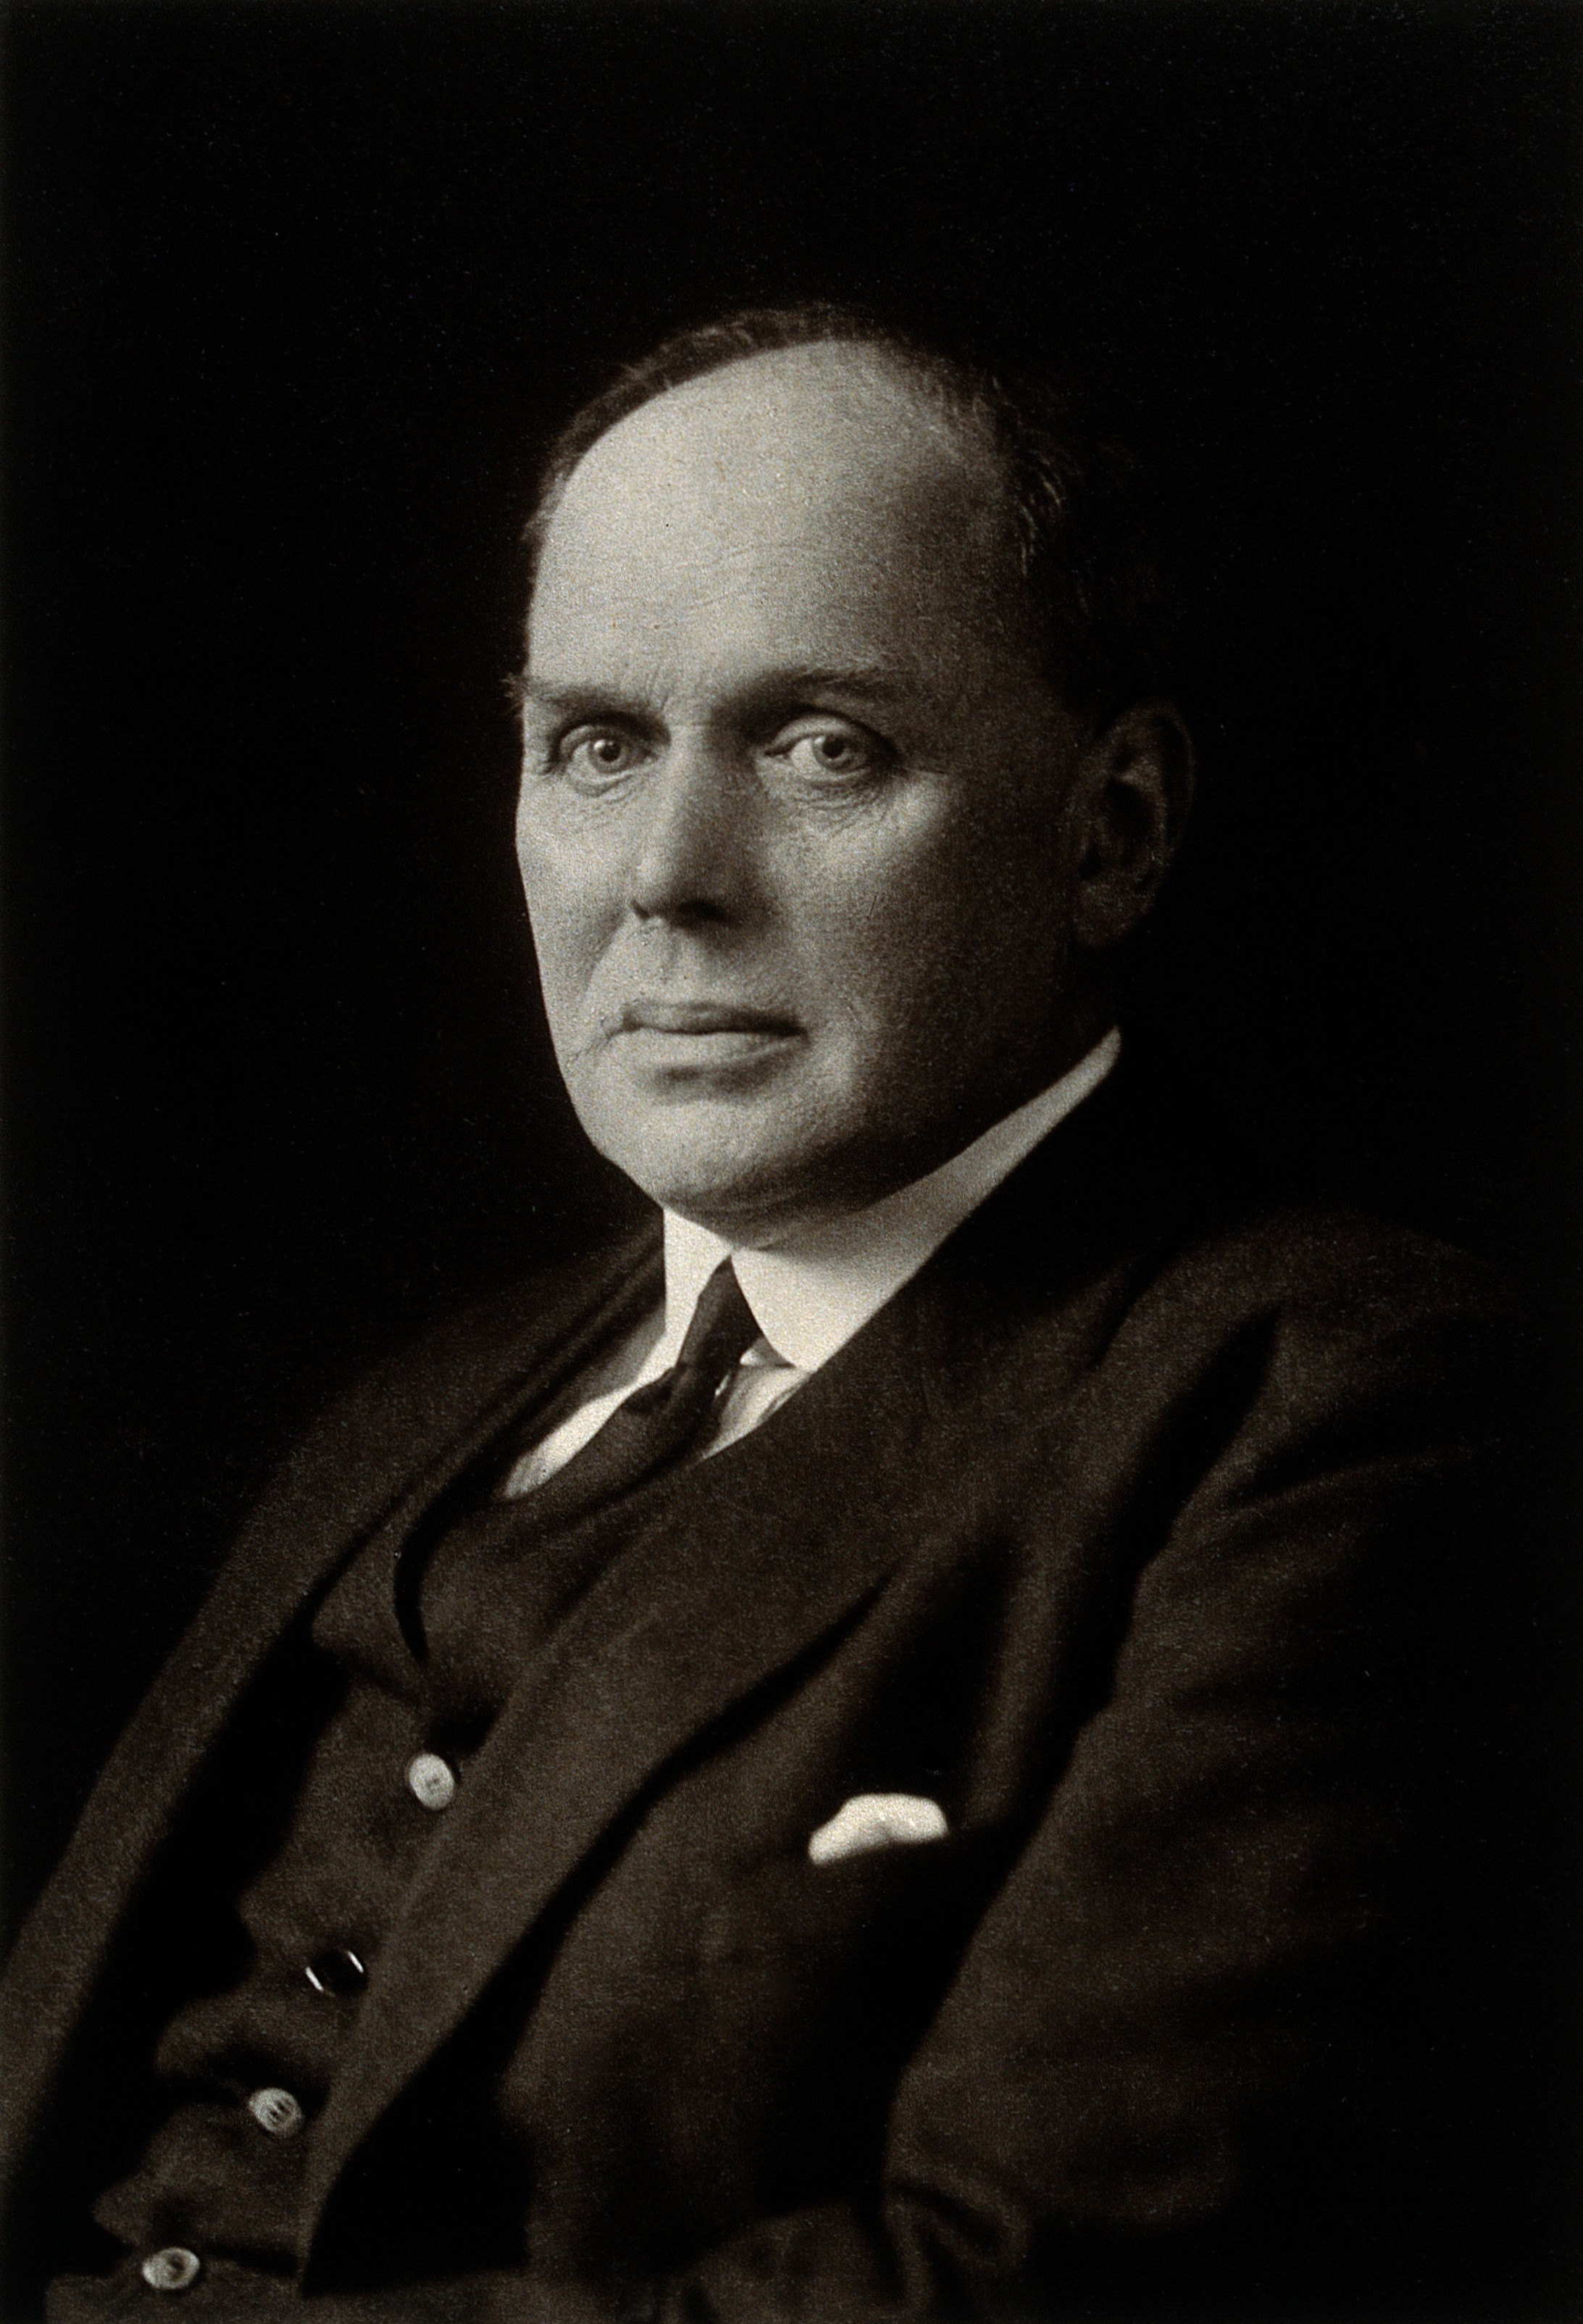 Sir Andrew Balfour. Photograph. Wellcome V0027815